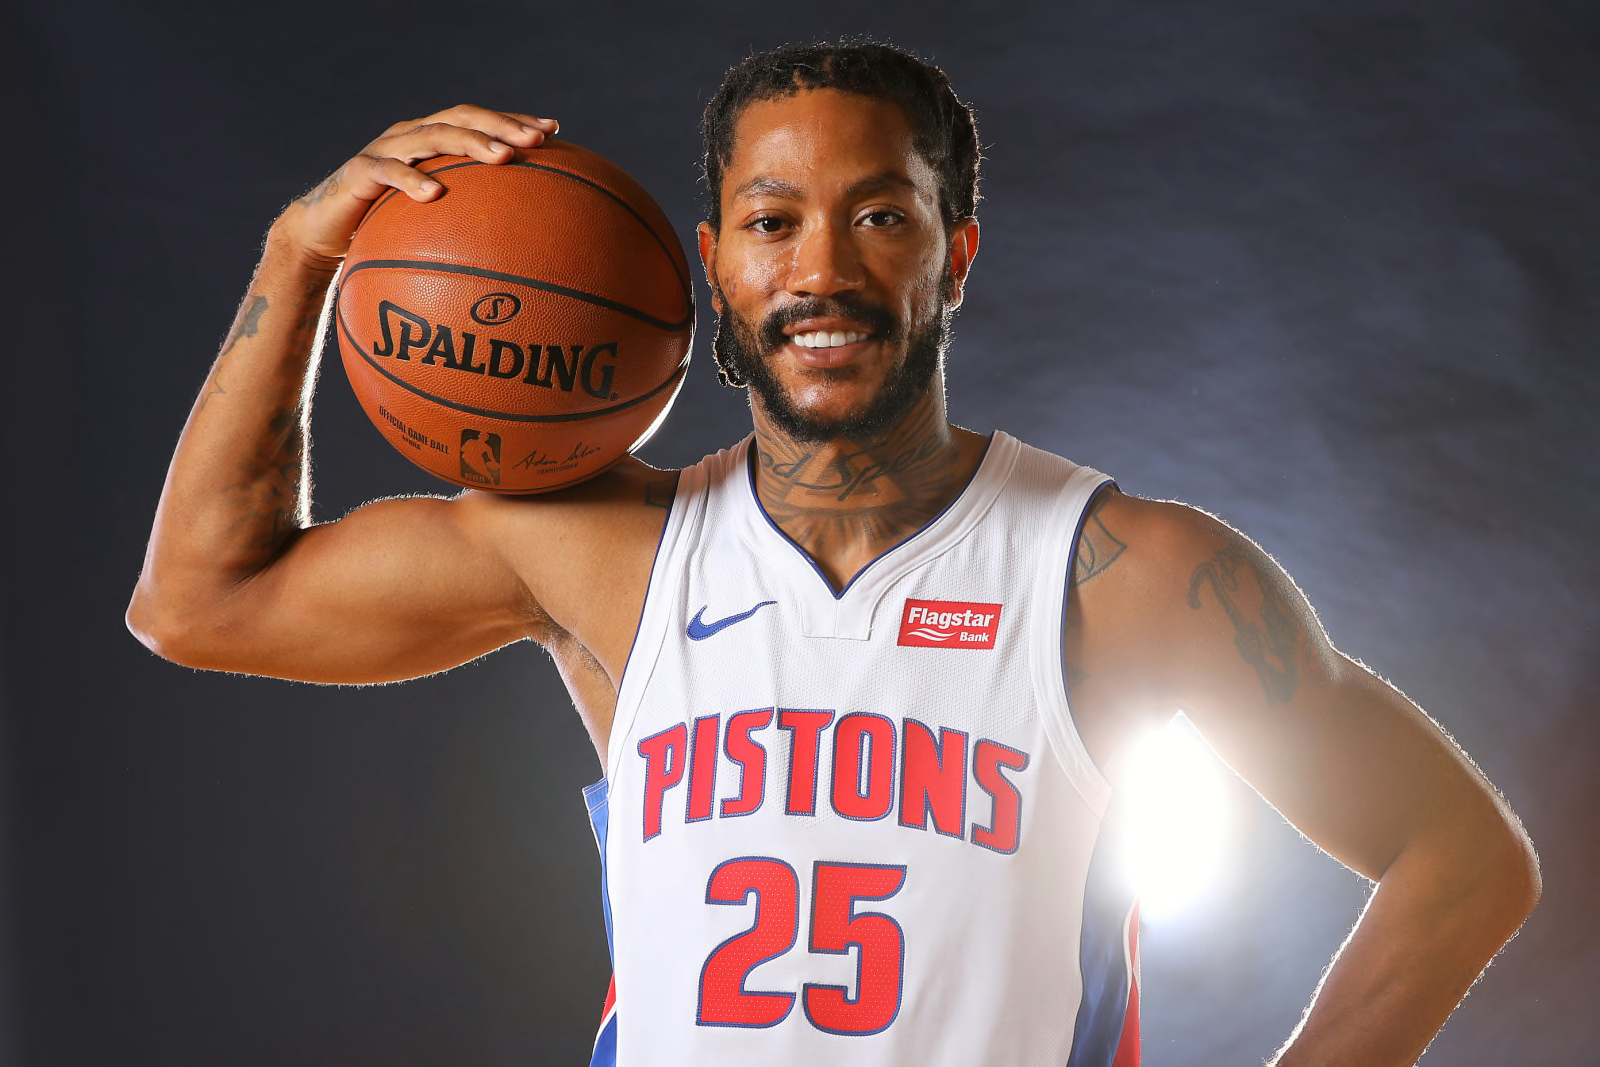 Detroit Pistons - We thank Derrick Rose for his contributions on and off  the court during his time as a Piston and wish him and his family well as  they move forward.